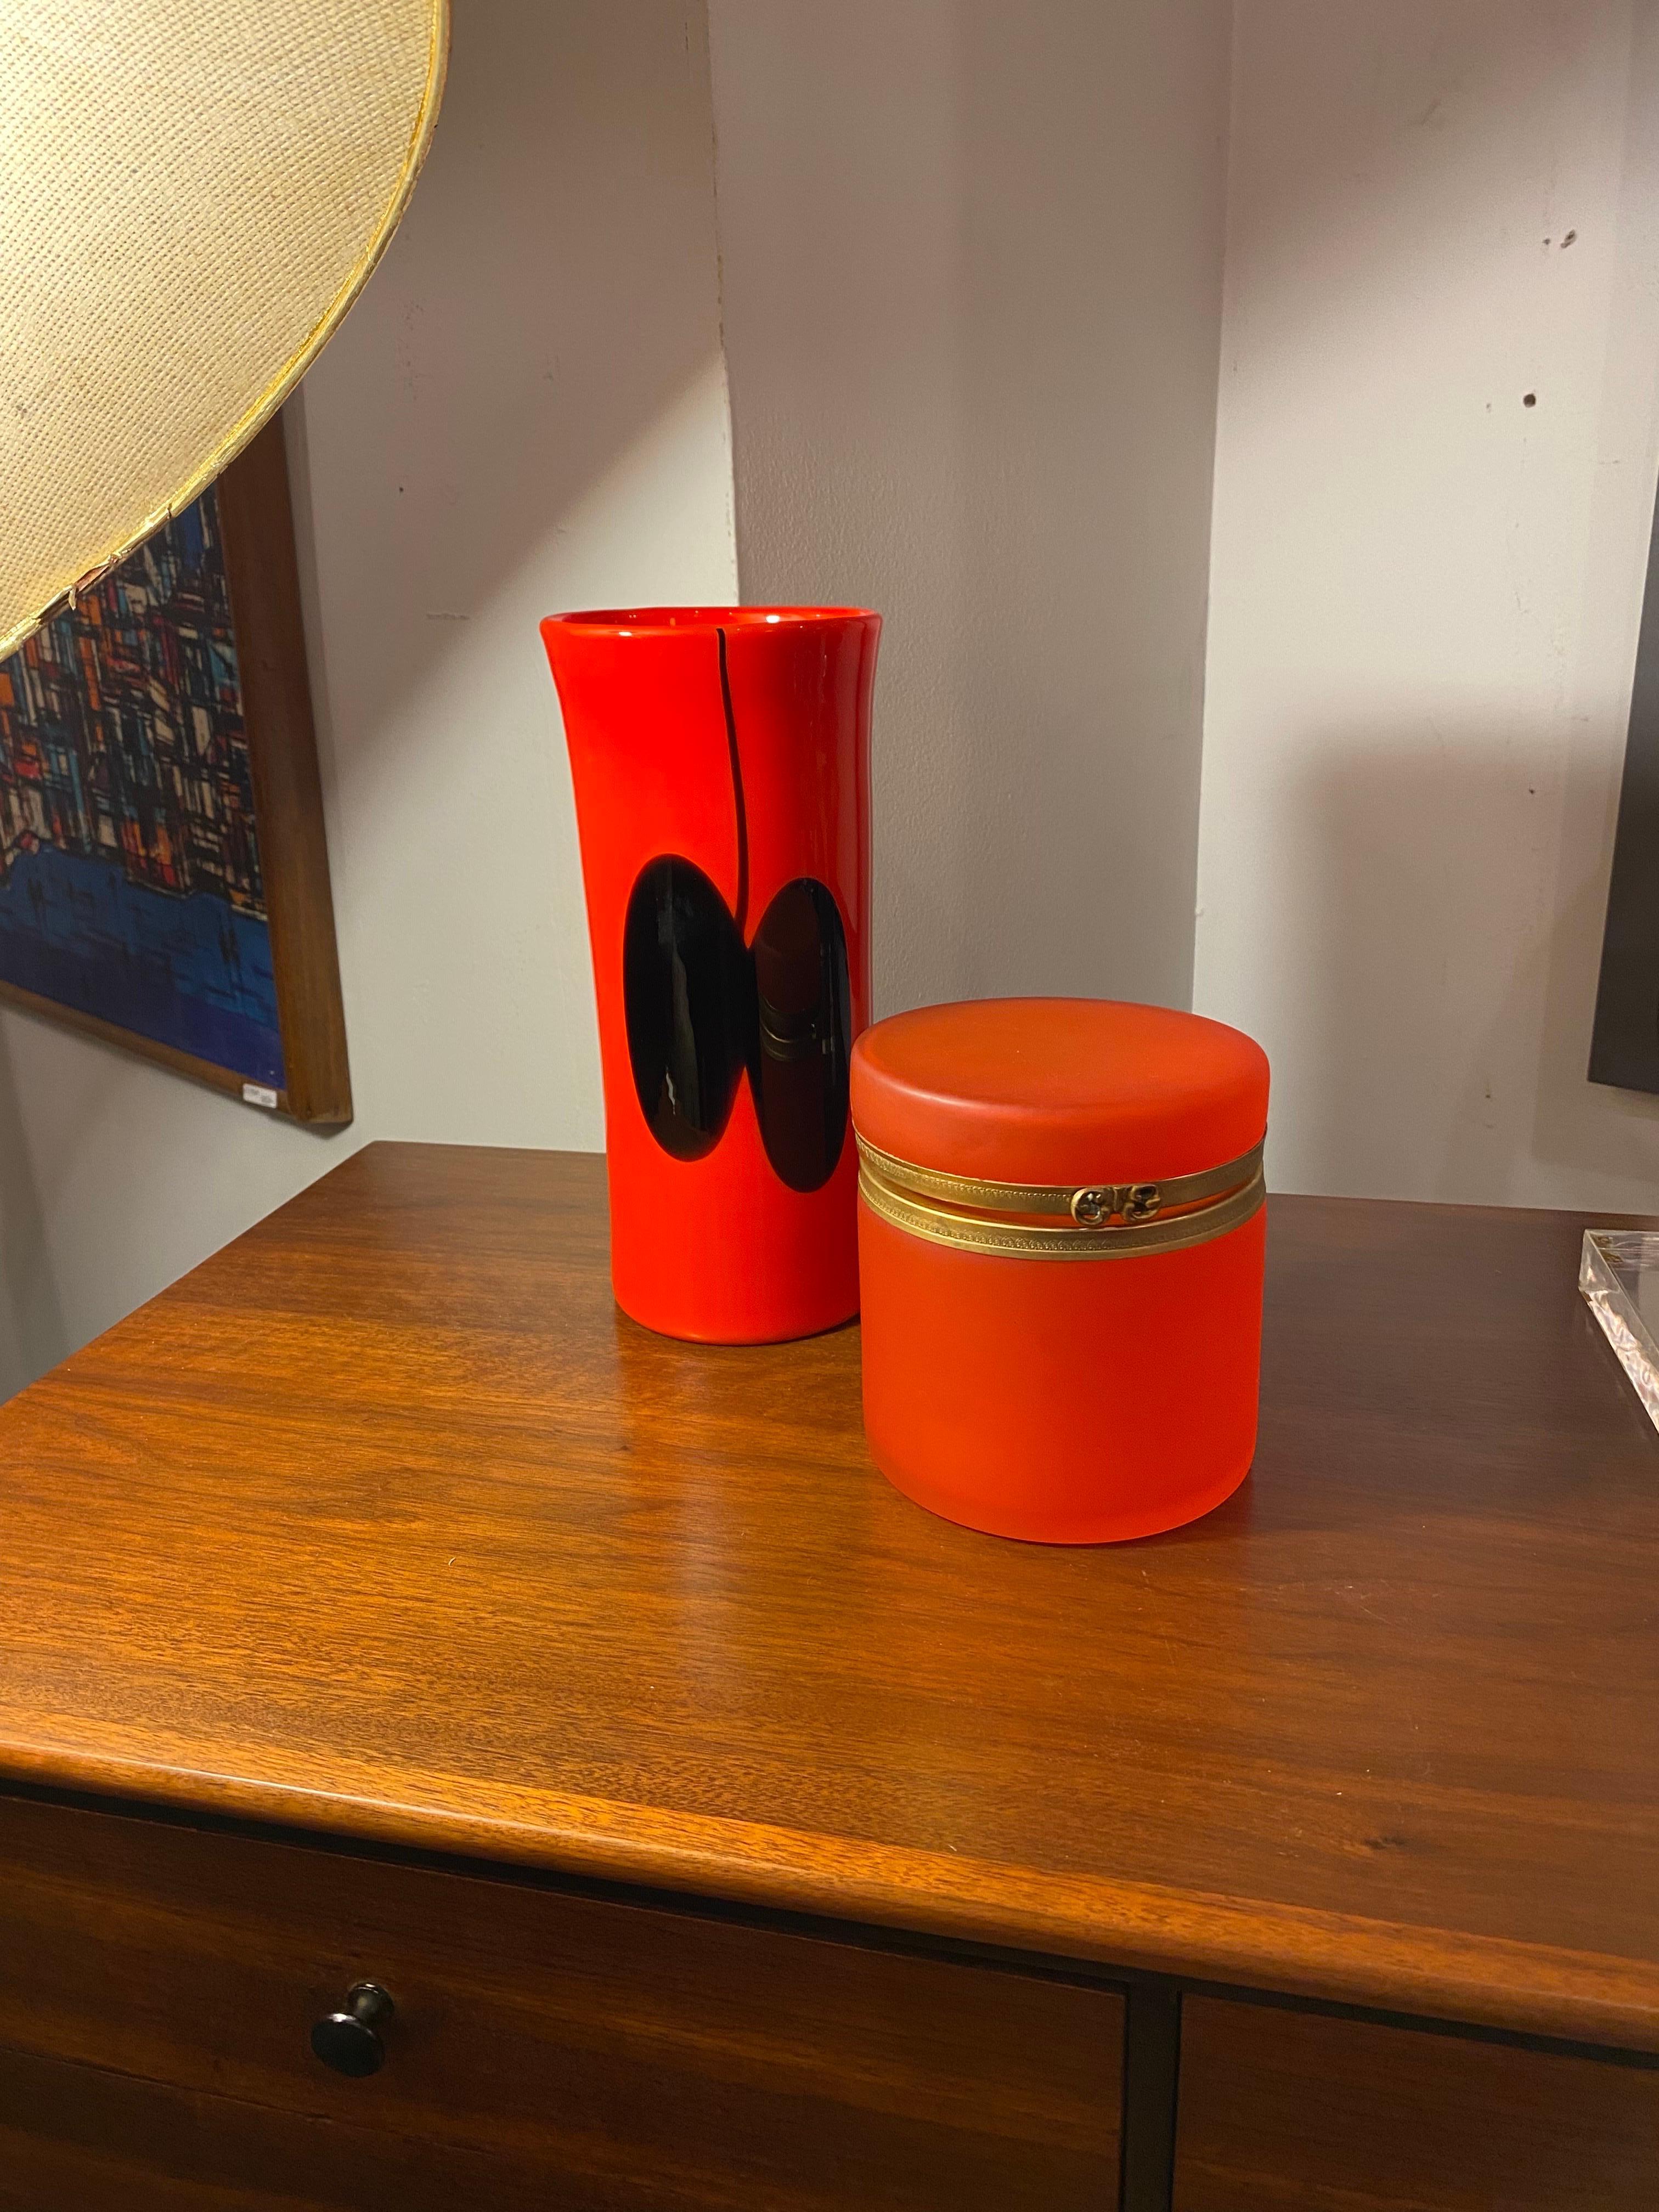 Heikki Orvola for Nuutajarvi Notsjo Oranfe Vase with Black Circle Design.  Vase was designed in several sizes.  Very Iconic Design of the period.  In very nice original condition!